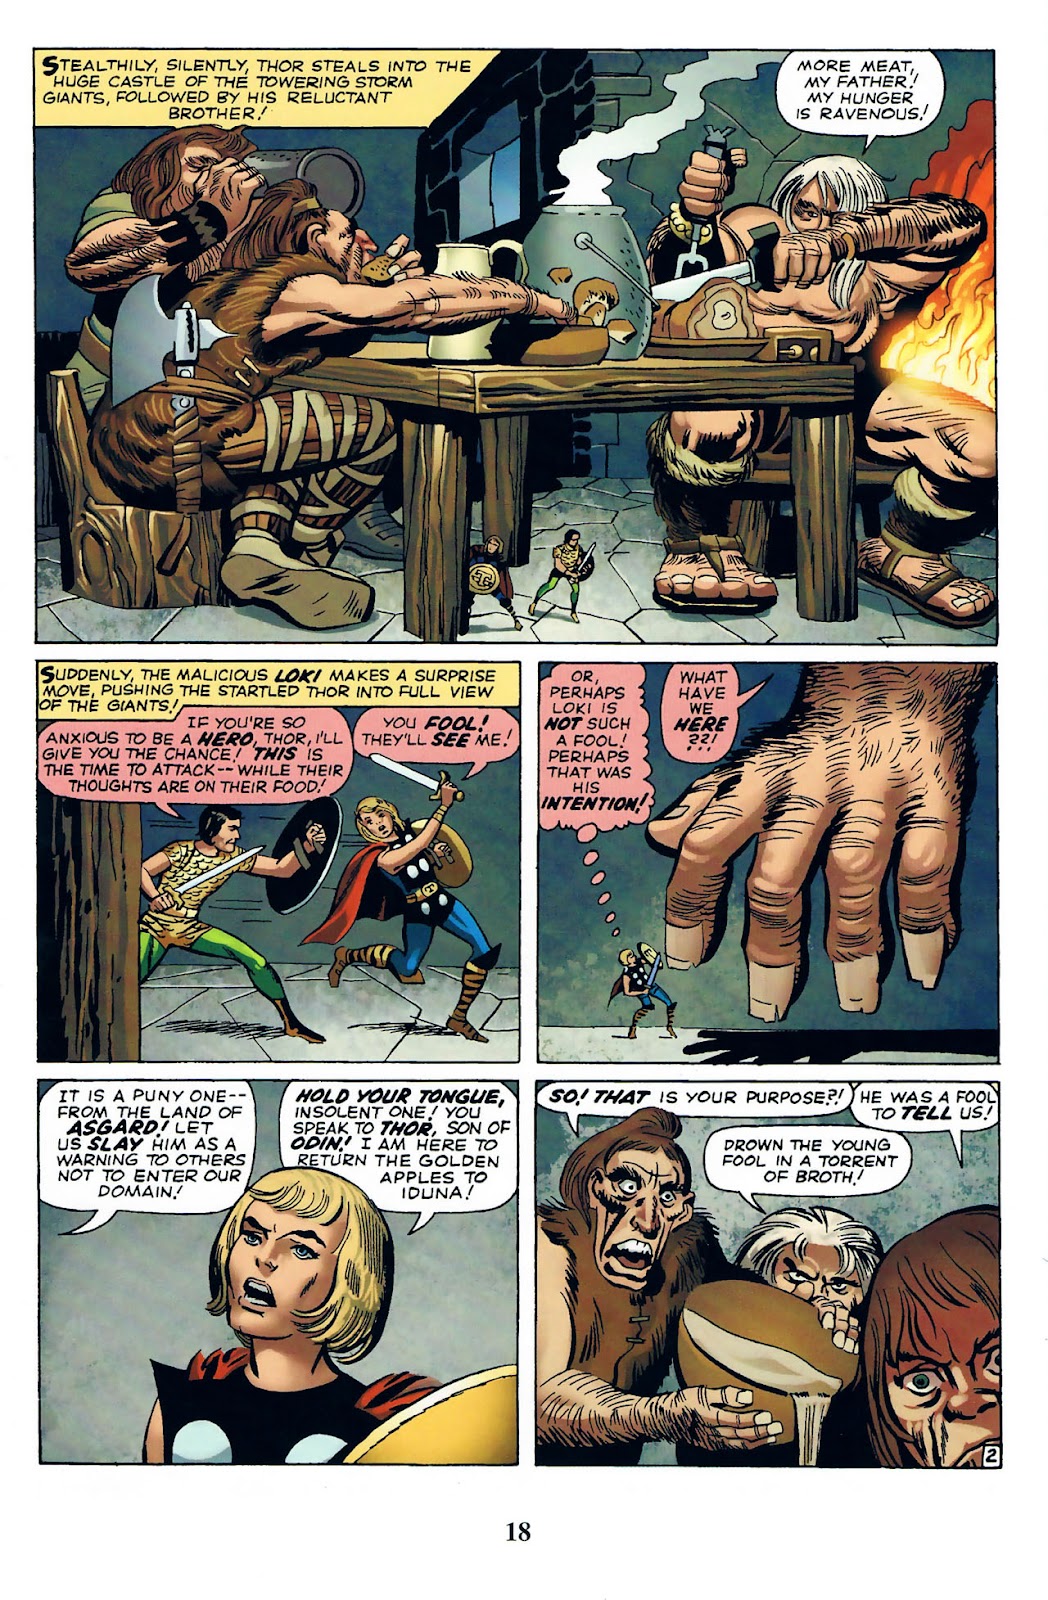 Thor: Tales of Asgard by Stan Lee & Jack Kirby issue 1 - Page 20